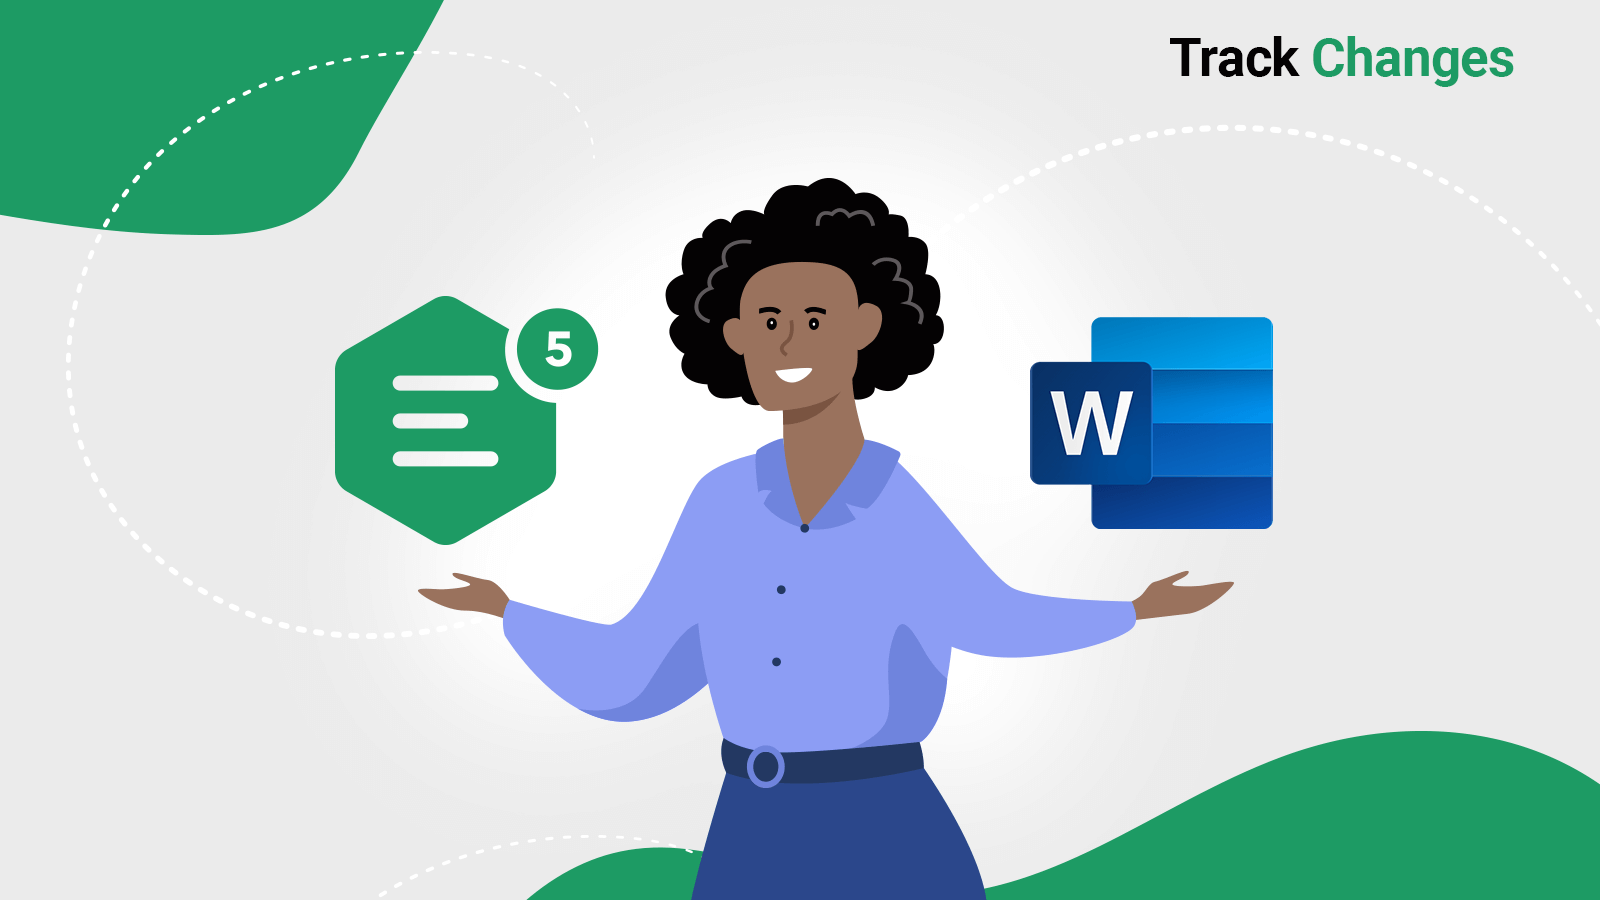 Microsoft Word Track Changes Compared with CKEditor 5 Track Changes Feature